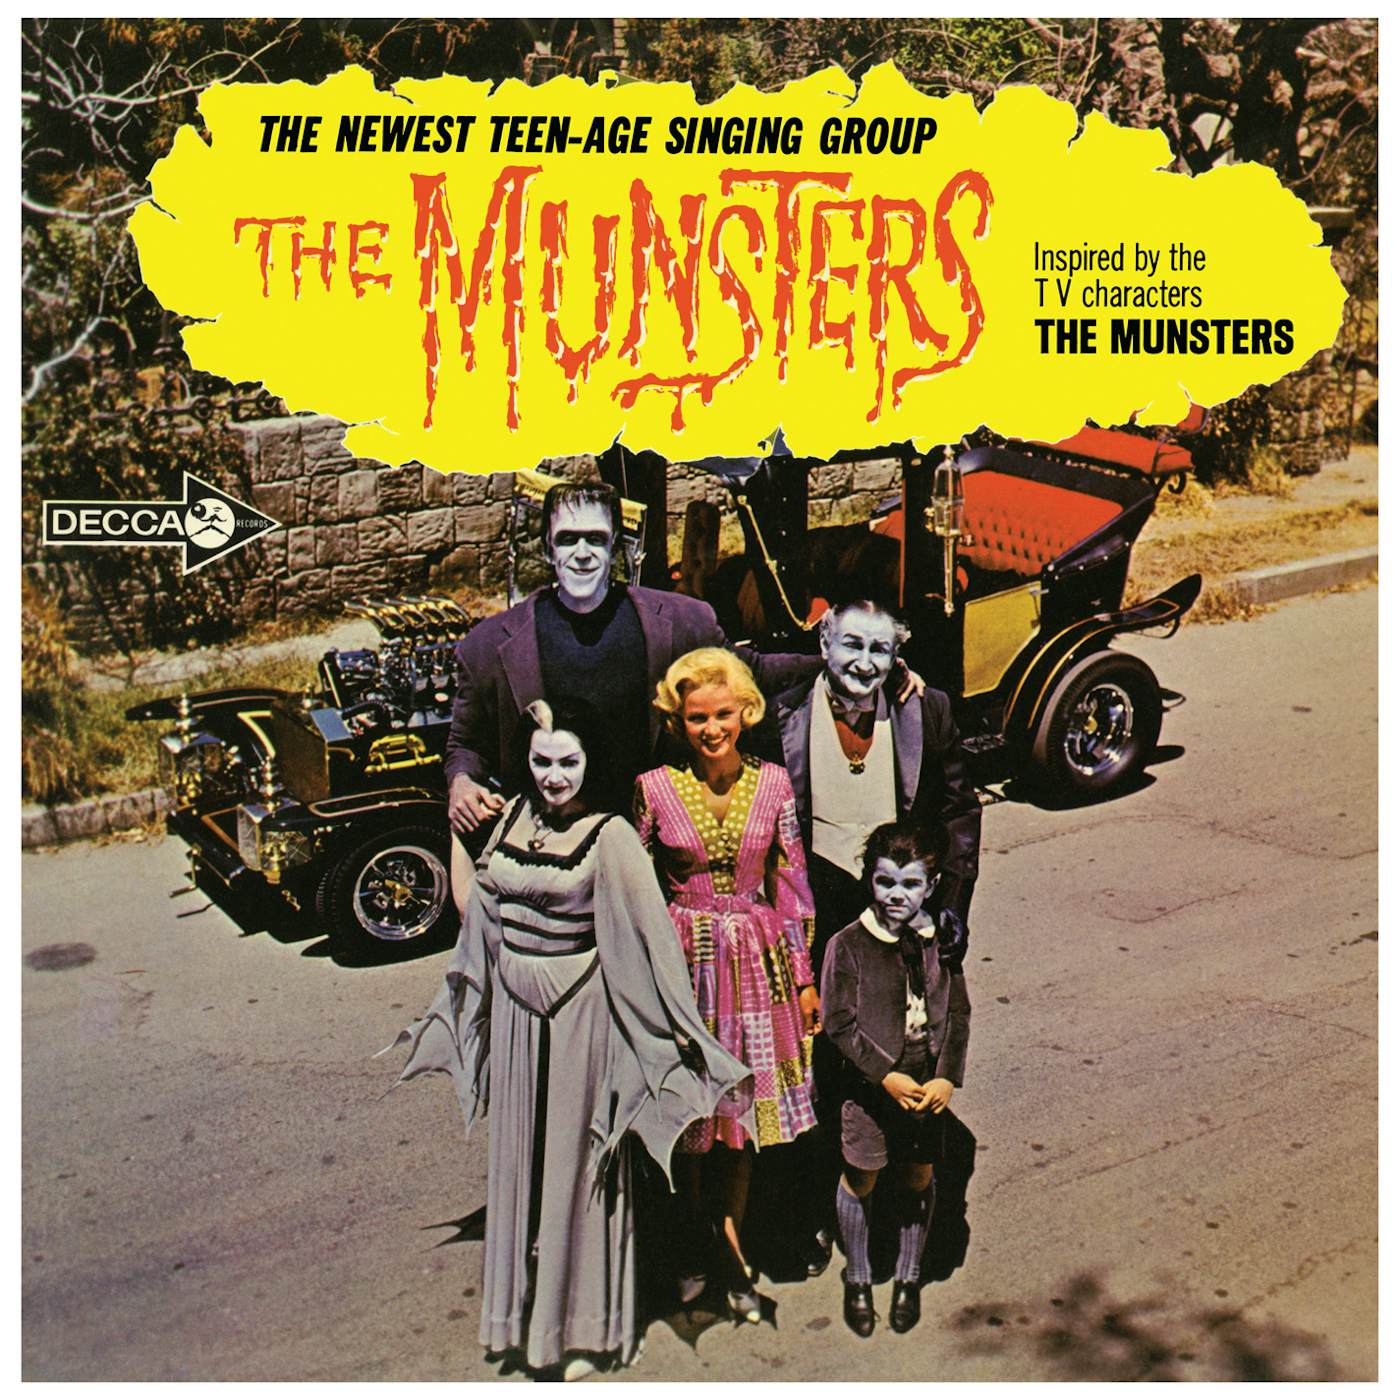 The Munsters Vinyl Record